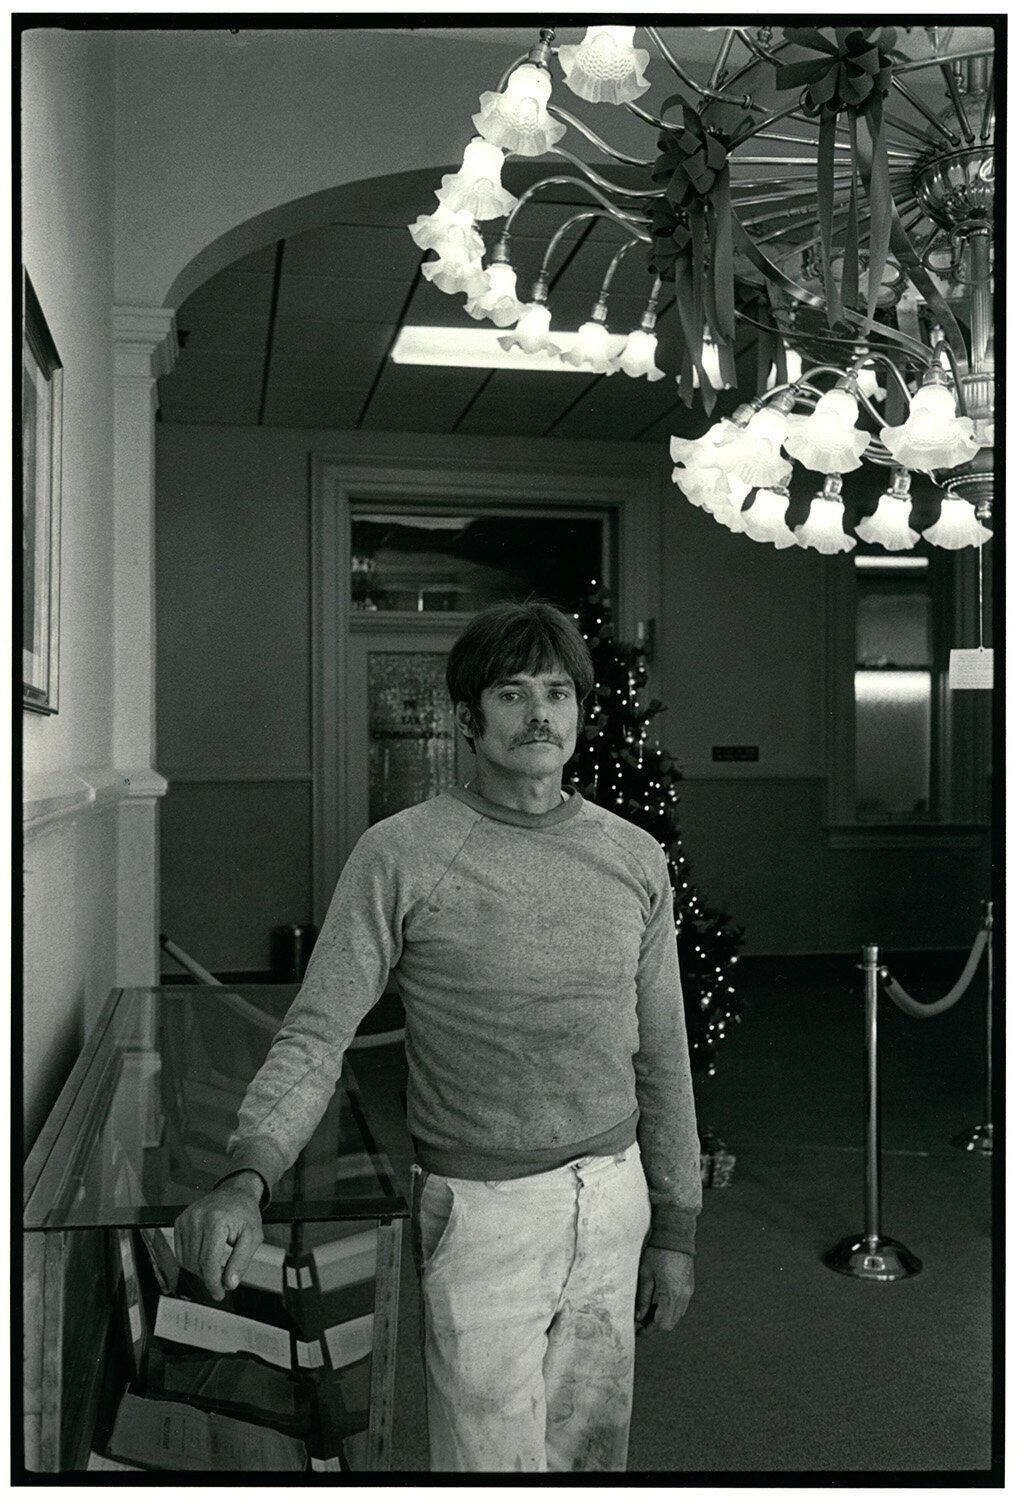   Prisoner with light fixture that he restored , 1981 Silver Gelatin Print 14 x 11 in. (paper size) The Do Good Fund, Inc., 2017-70 